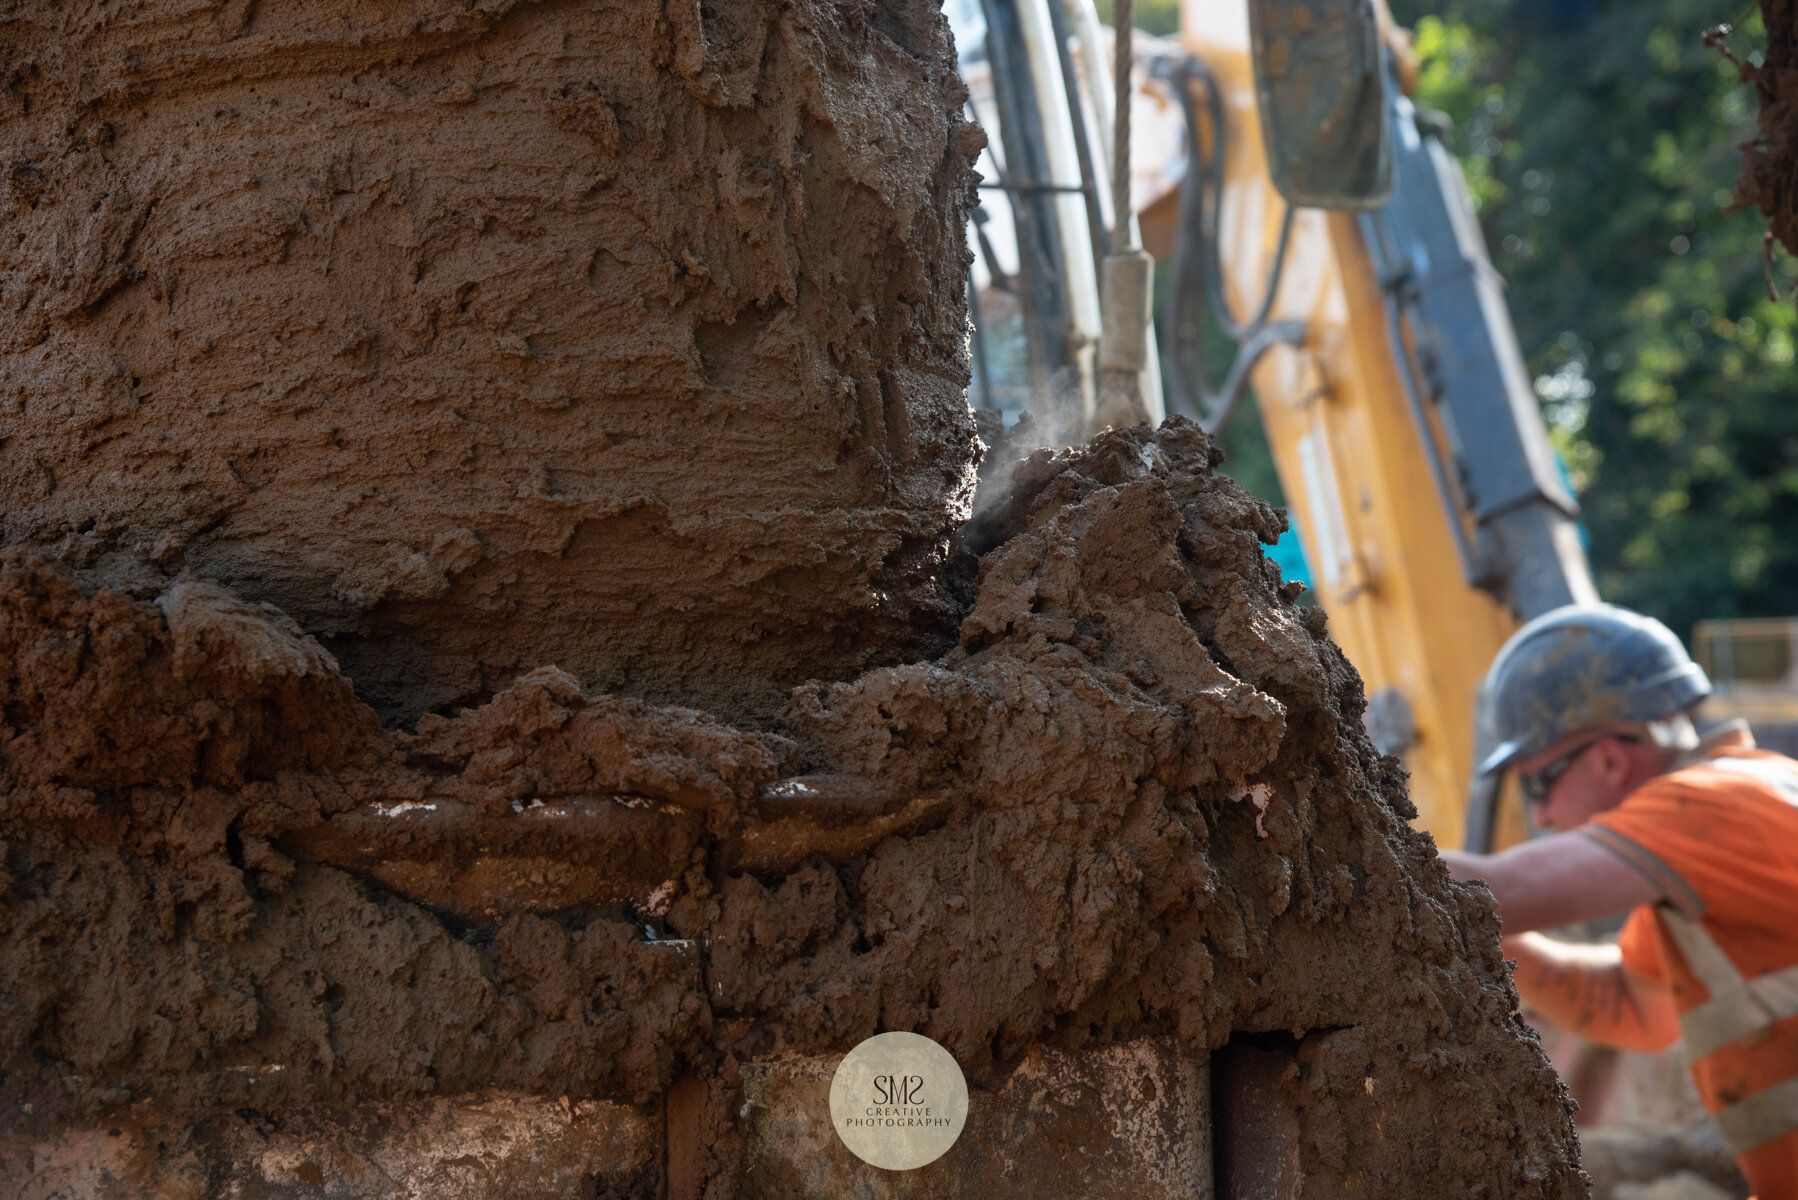  The auger digs deep into the ground to excavate the earth for foundations to be inserted. 